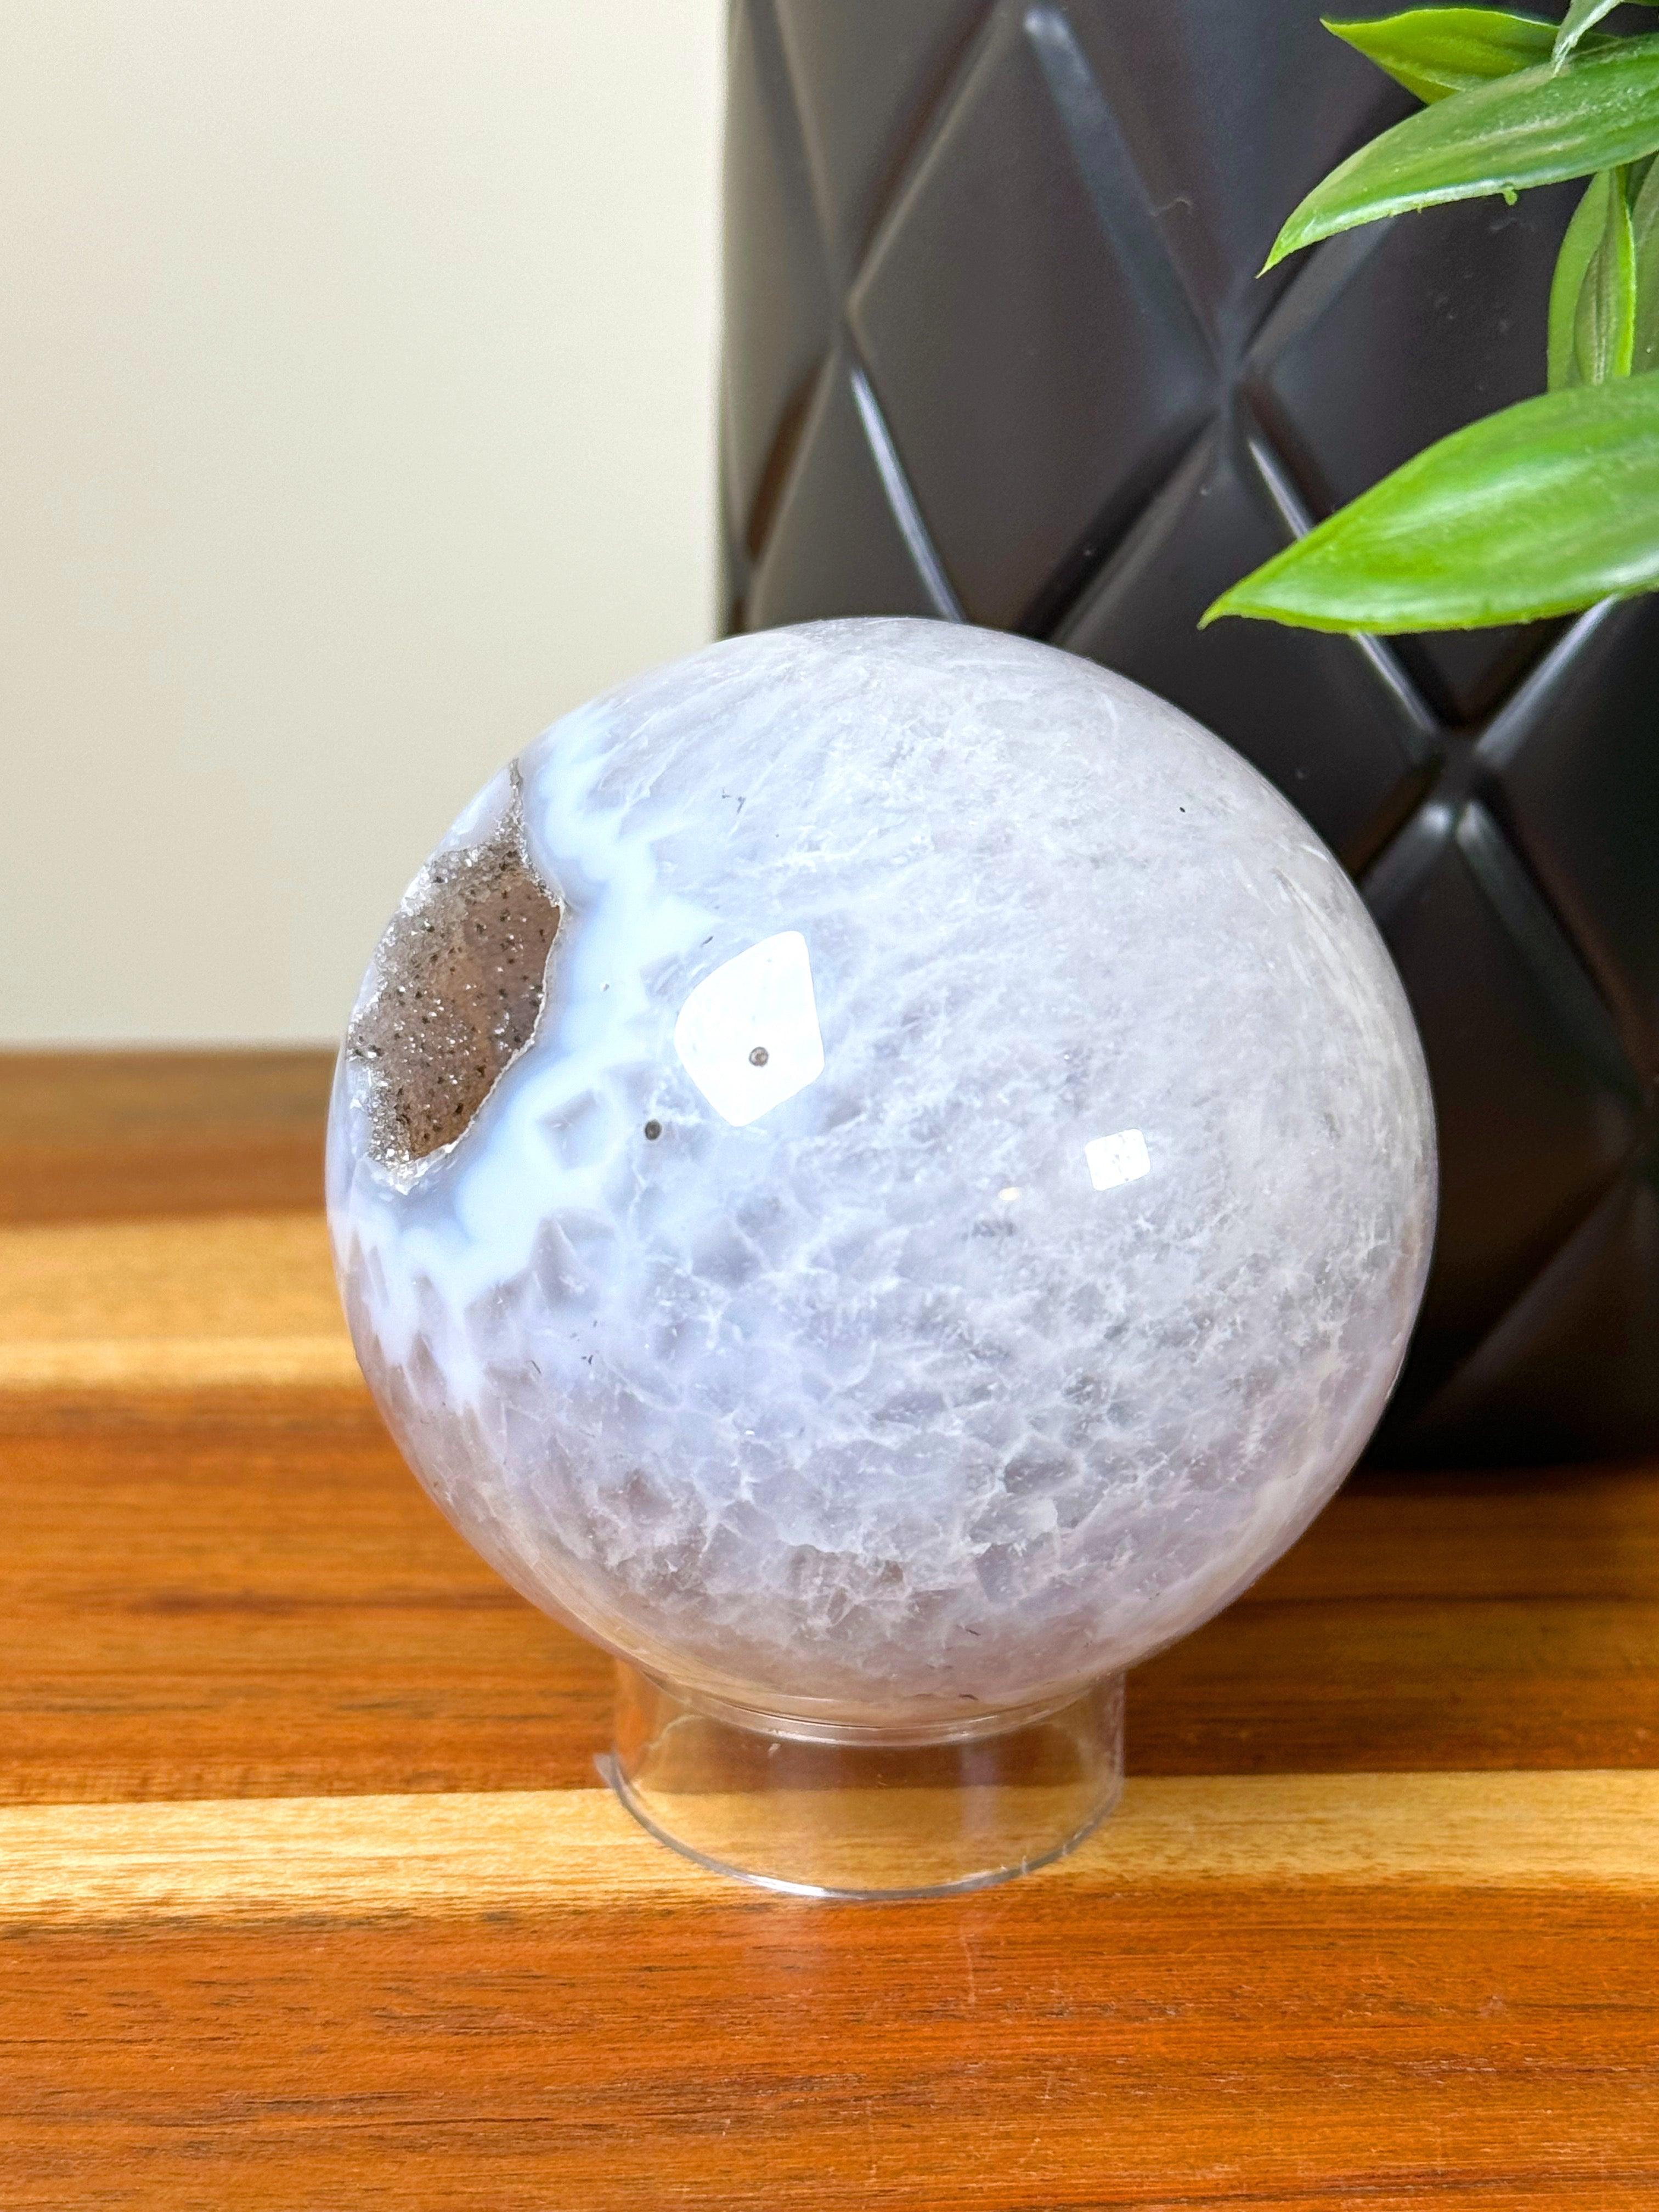 DRUZY AGATE SPHERE 18 - agate, druzy agate, googly agate, googly eye, googly eye agate, one of a kind, sphere, statement piece - The Mineral Maven